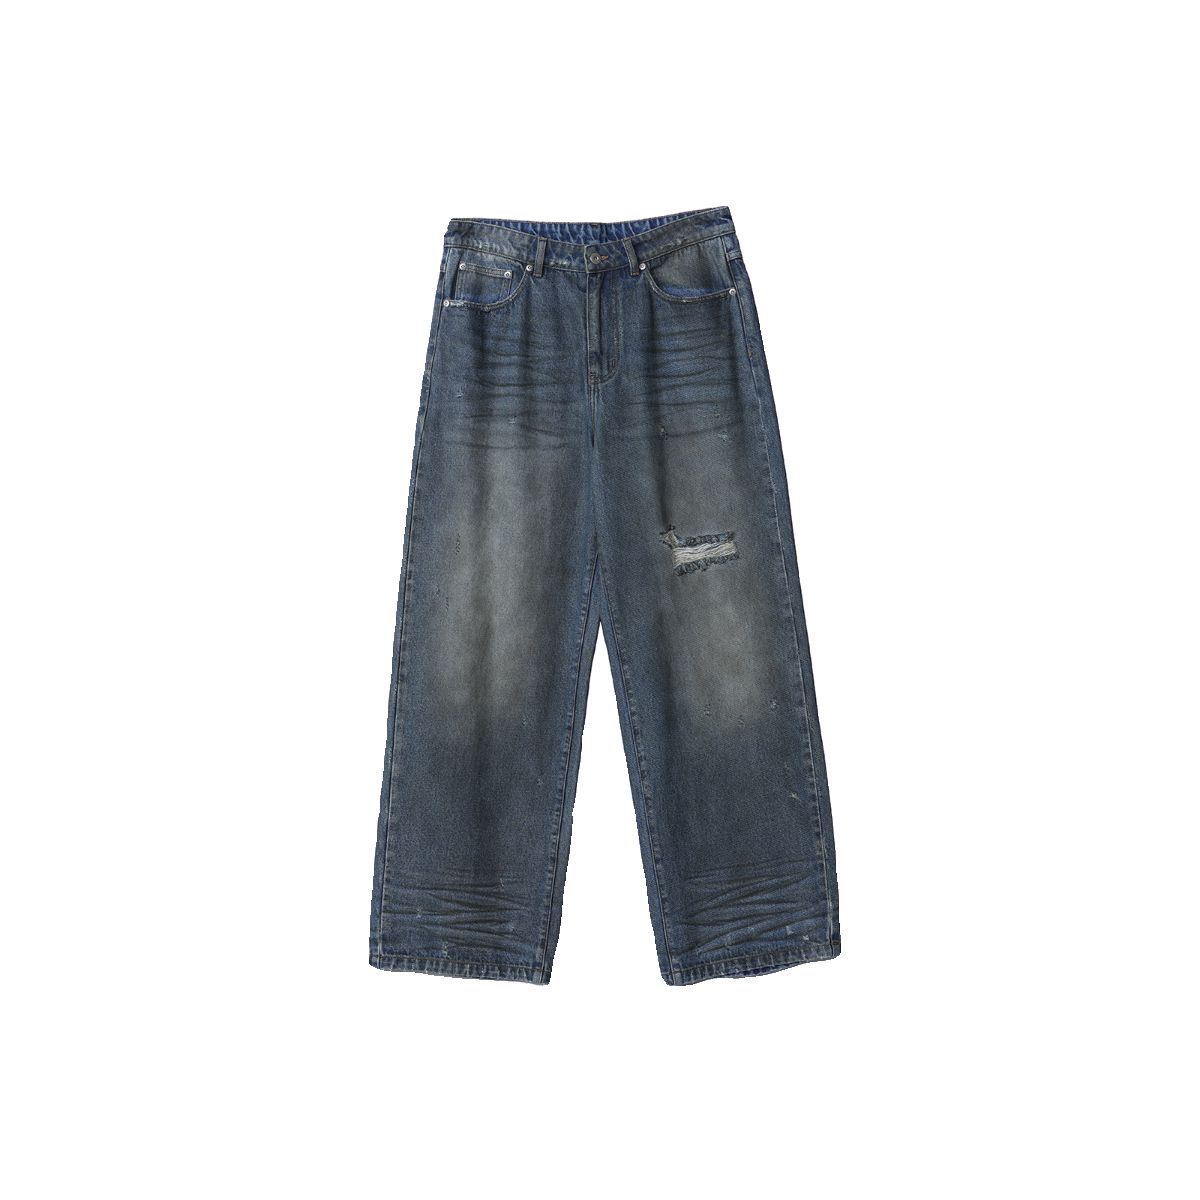 Ripped and Washed Jeans Korean Street Fashion Jeans By Roaring Wild Shop Online at OH Vault